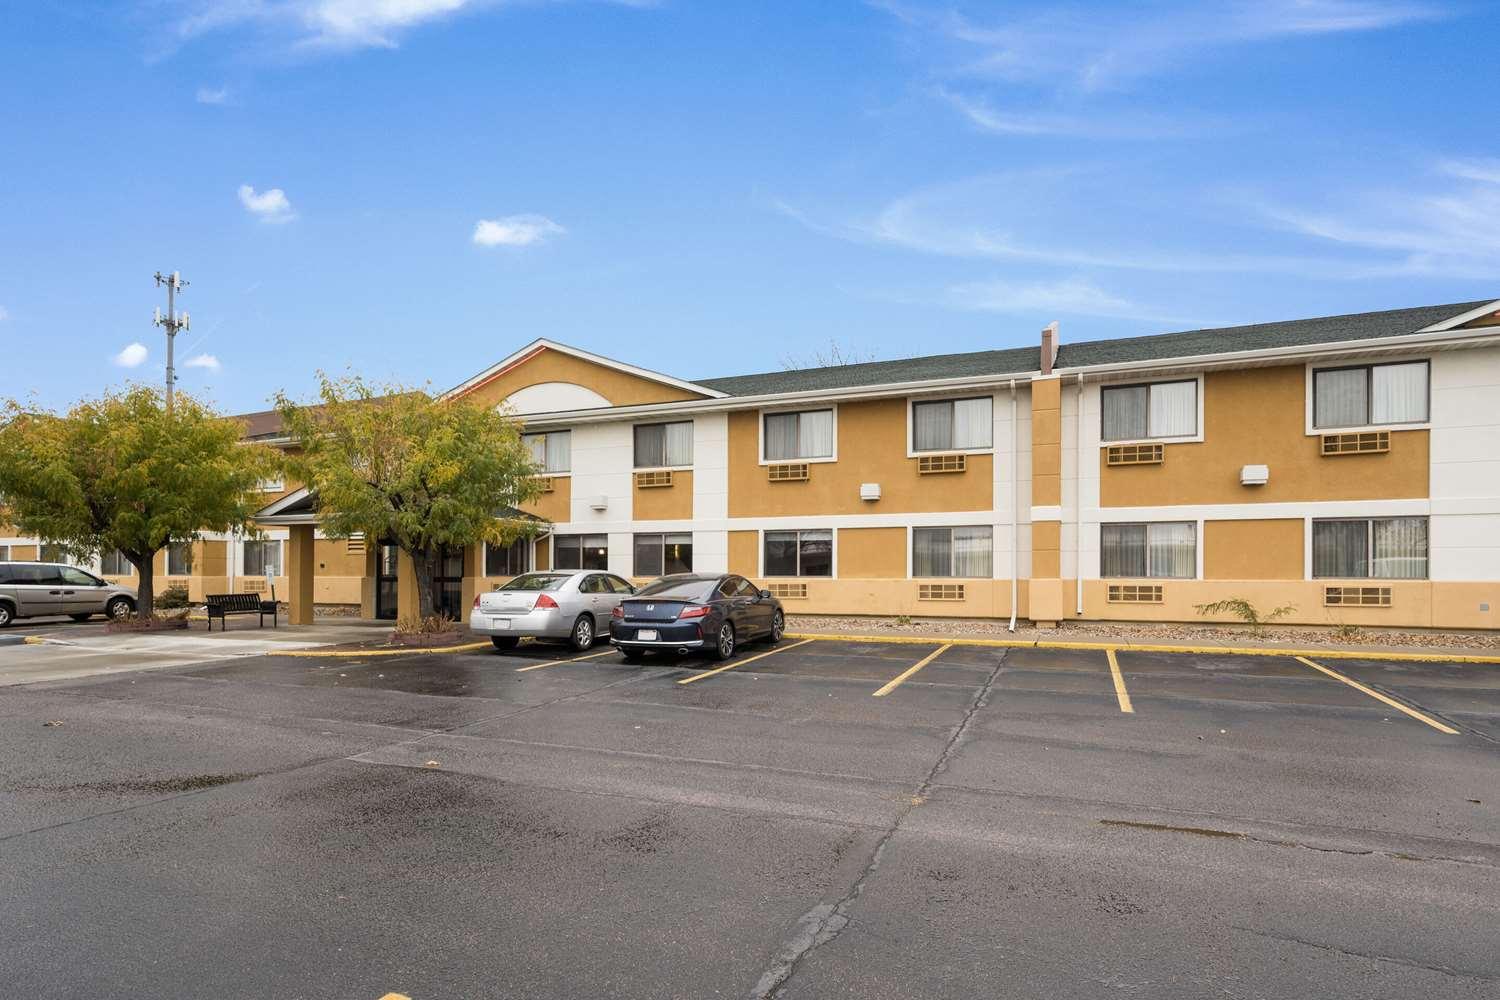 Quality Inn and Suites South in Sioux Falls, SD